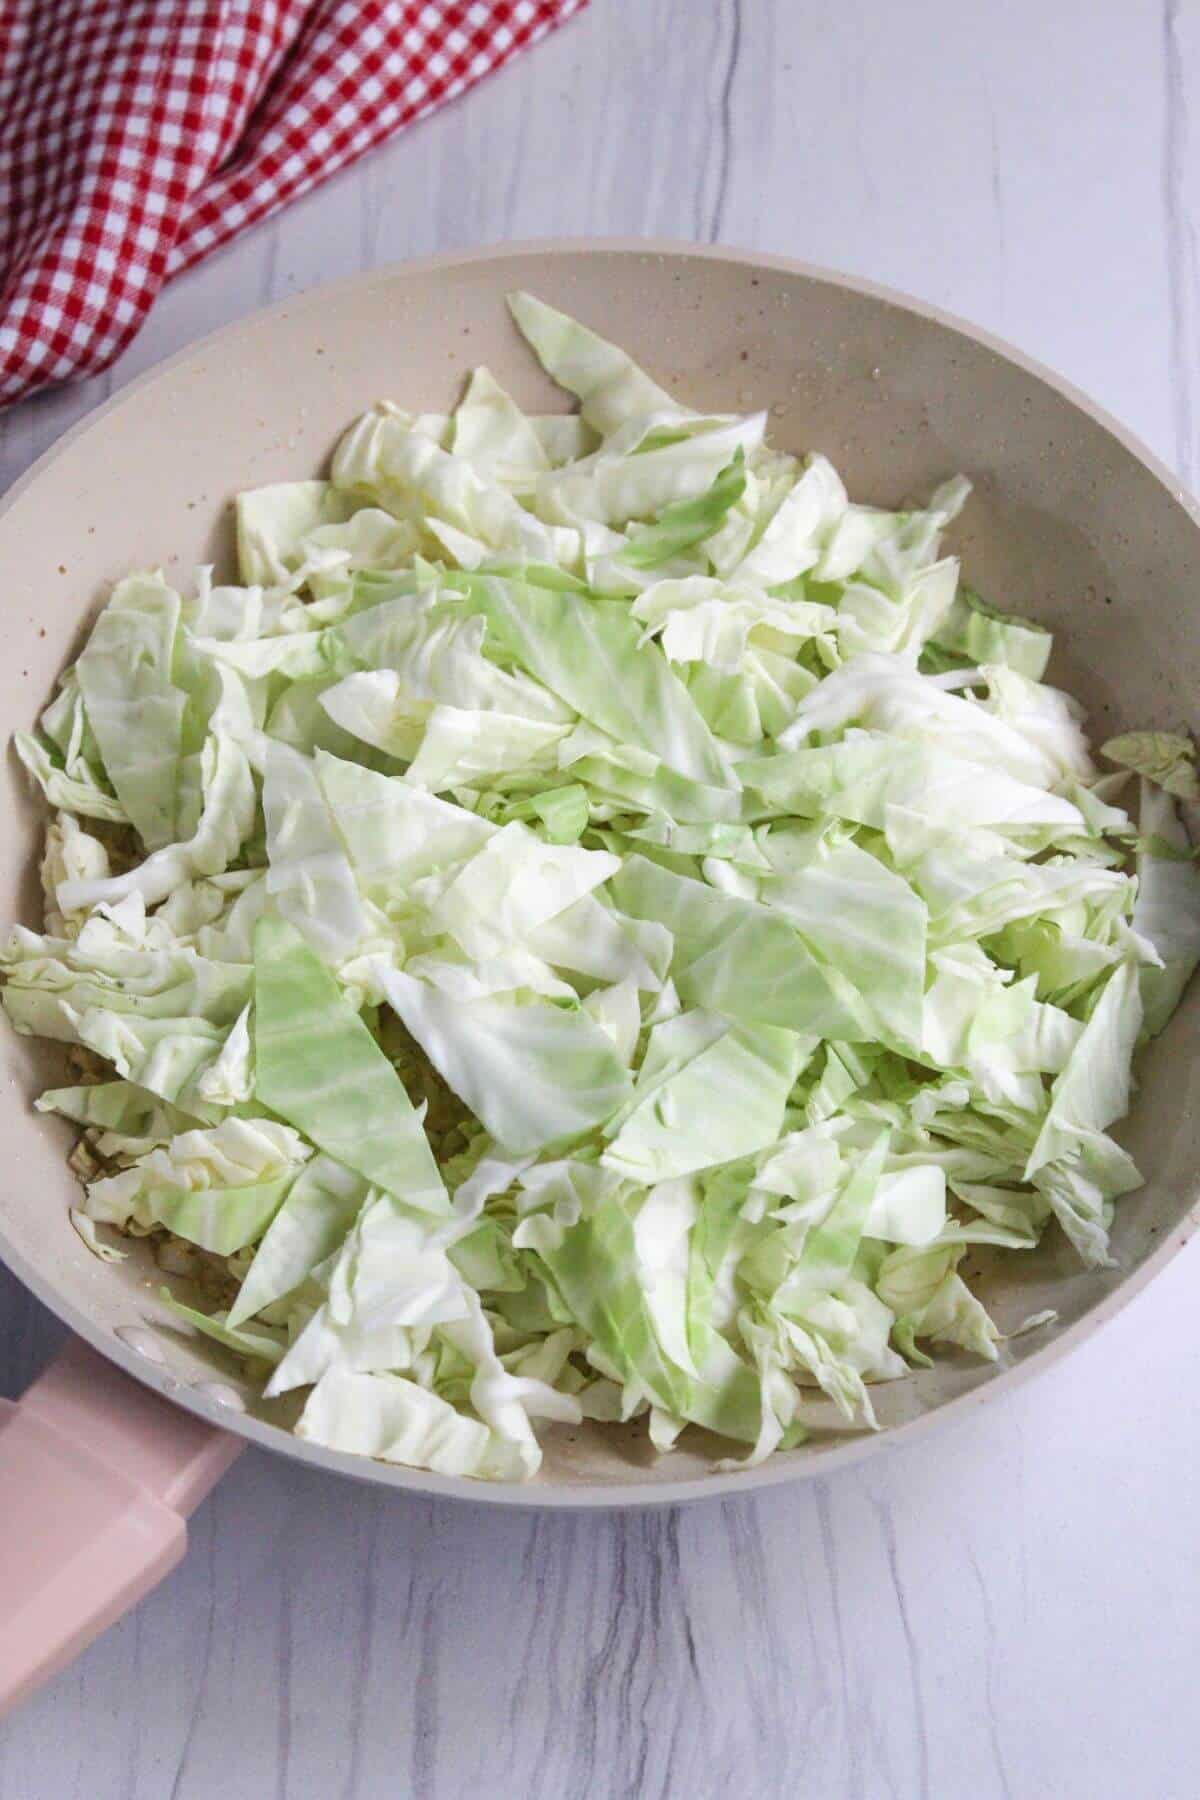 Chopped cabbage added to skillet.